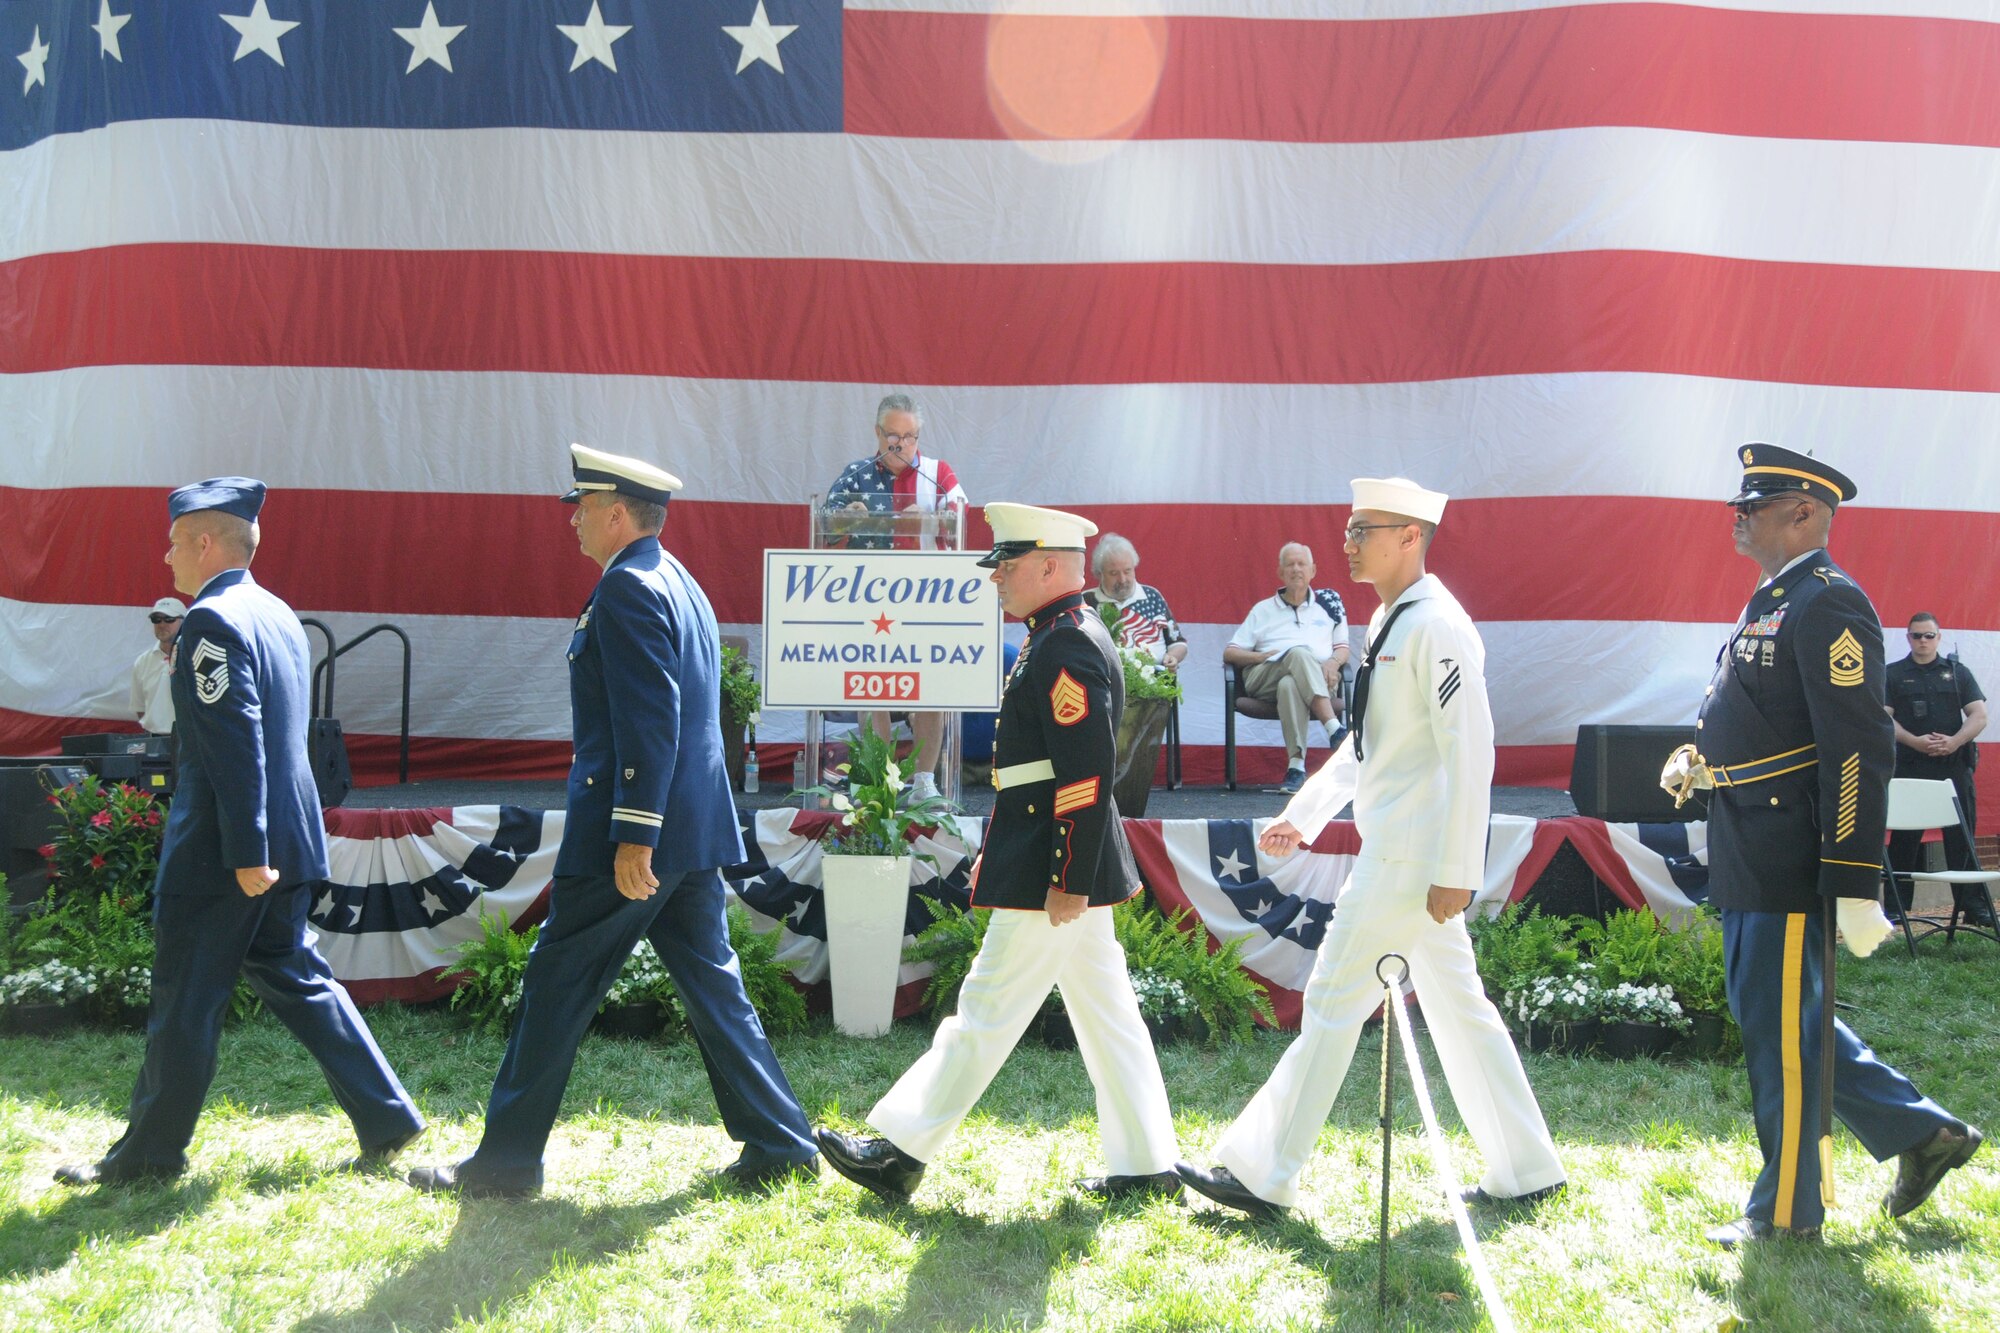 Members of the five branches of the U.S. military walk in unison as part of the Roswell Memorial Day Ceremony at Roswell City Hall area, Roswell, Georgia on May 27, 2019. At the event, all branches of the military were represented and individual service representatives from each branch participated in the mixed service recognition portion of the program. (U.S. Air Force photo by Senior Airman Justin Clayvon)